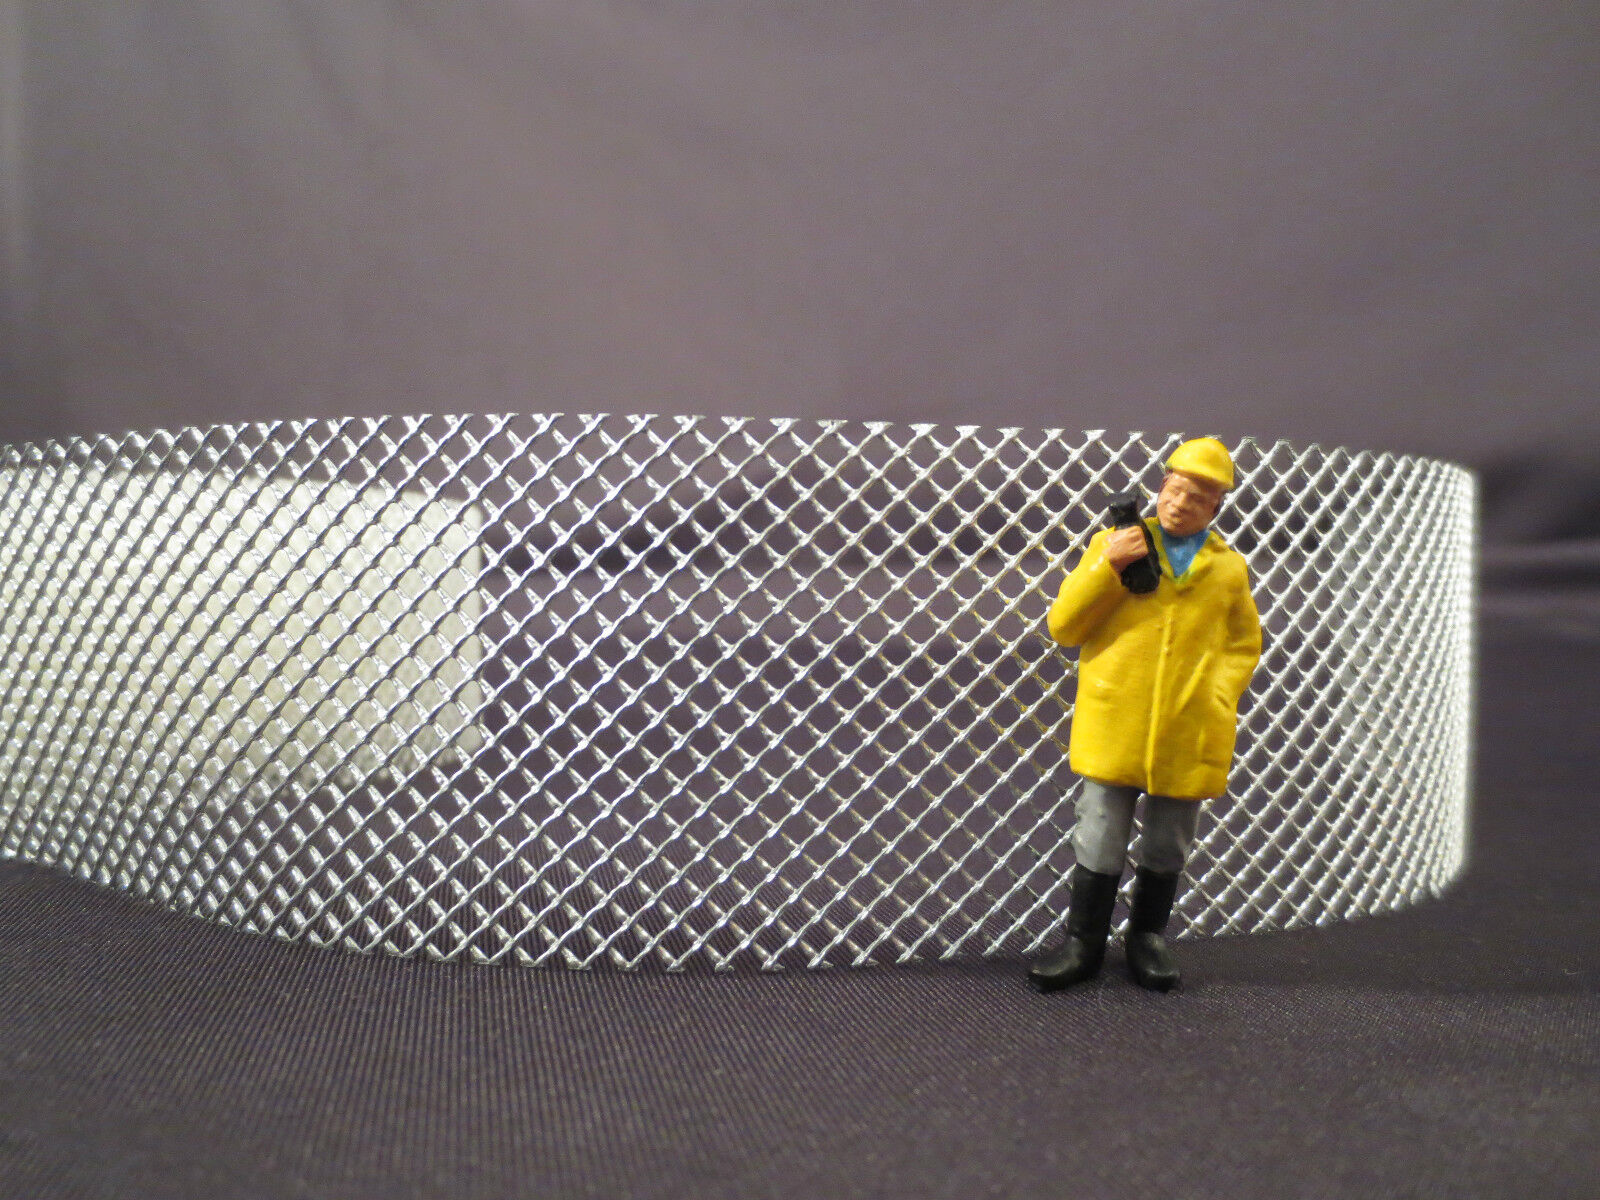 O SCALE CHAIN LINK FENCE / FENCING / LIONEL LAYOUT / BALLAST  / PART / STRUCTURE